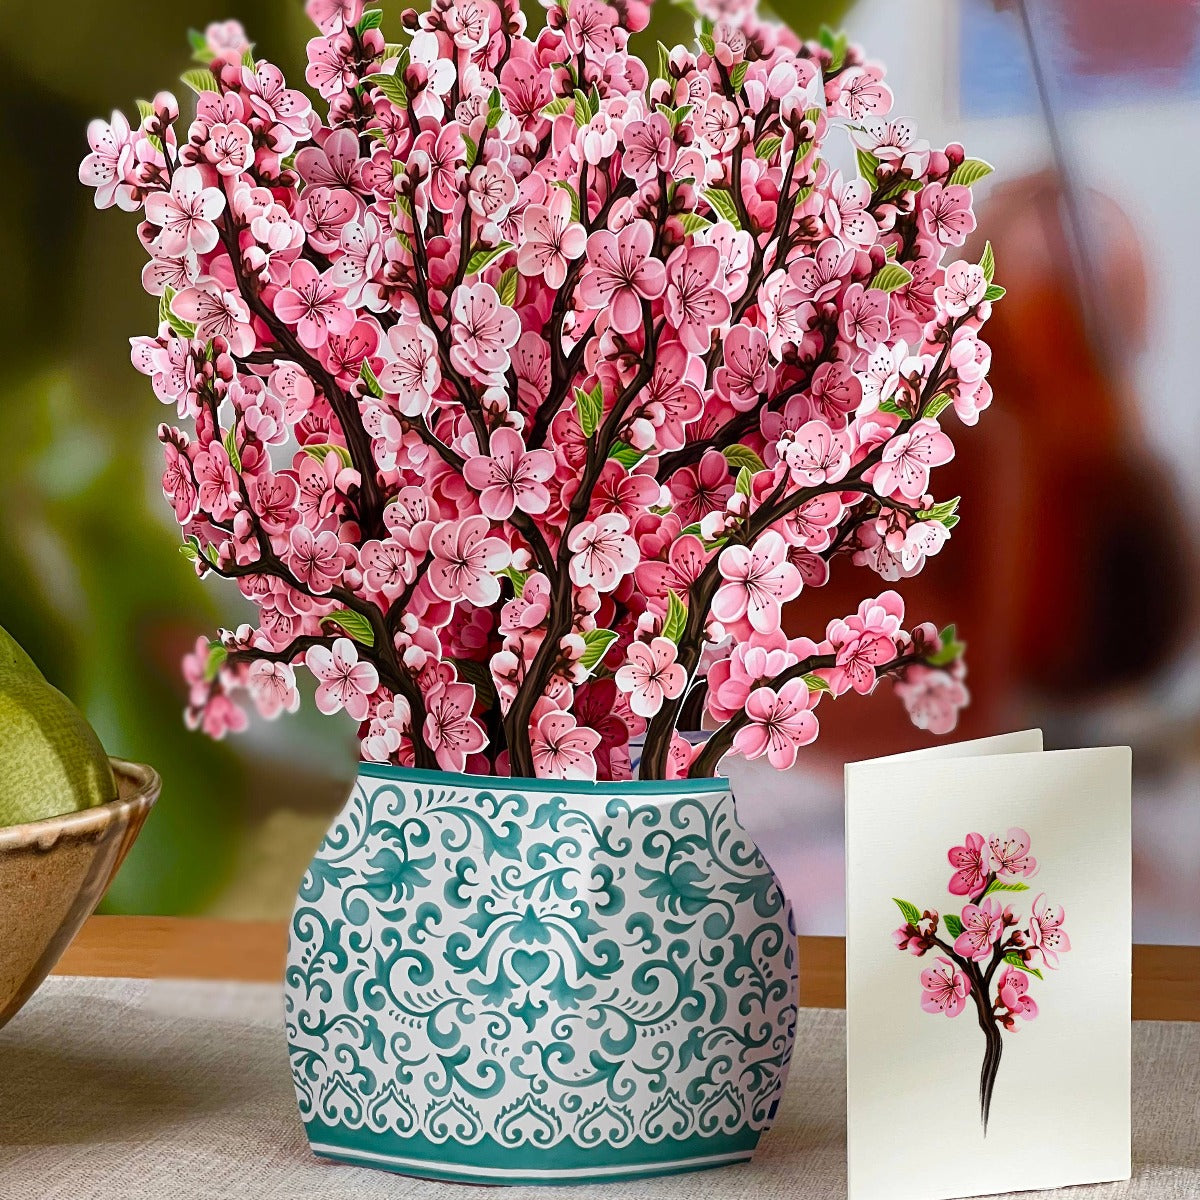 Cherry Blossom Pop-up Greeting Card- A perfect gift Media 1 of 2